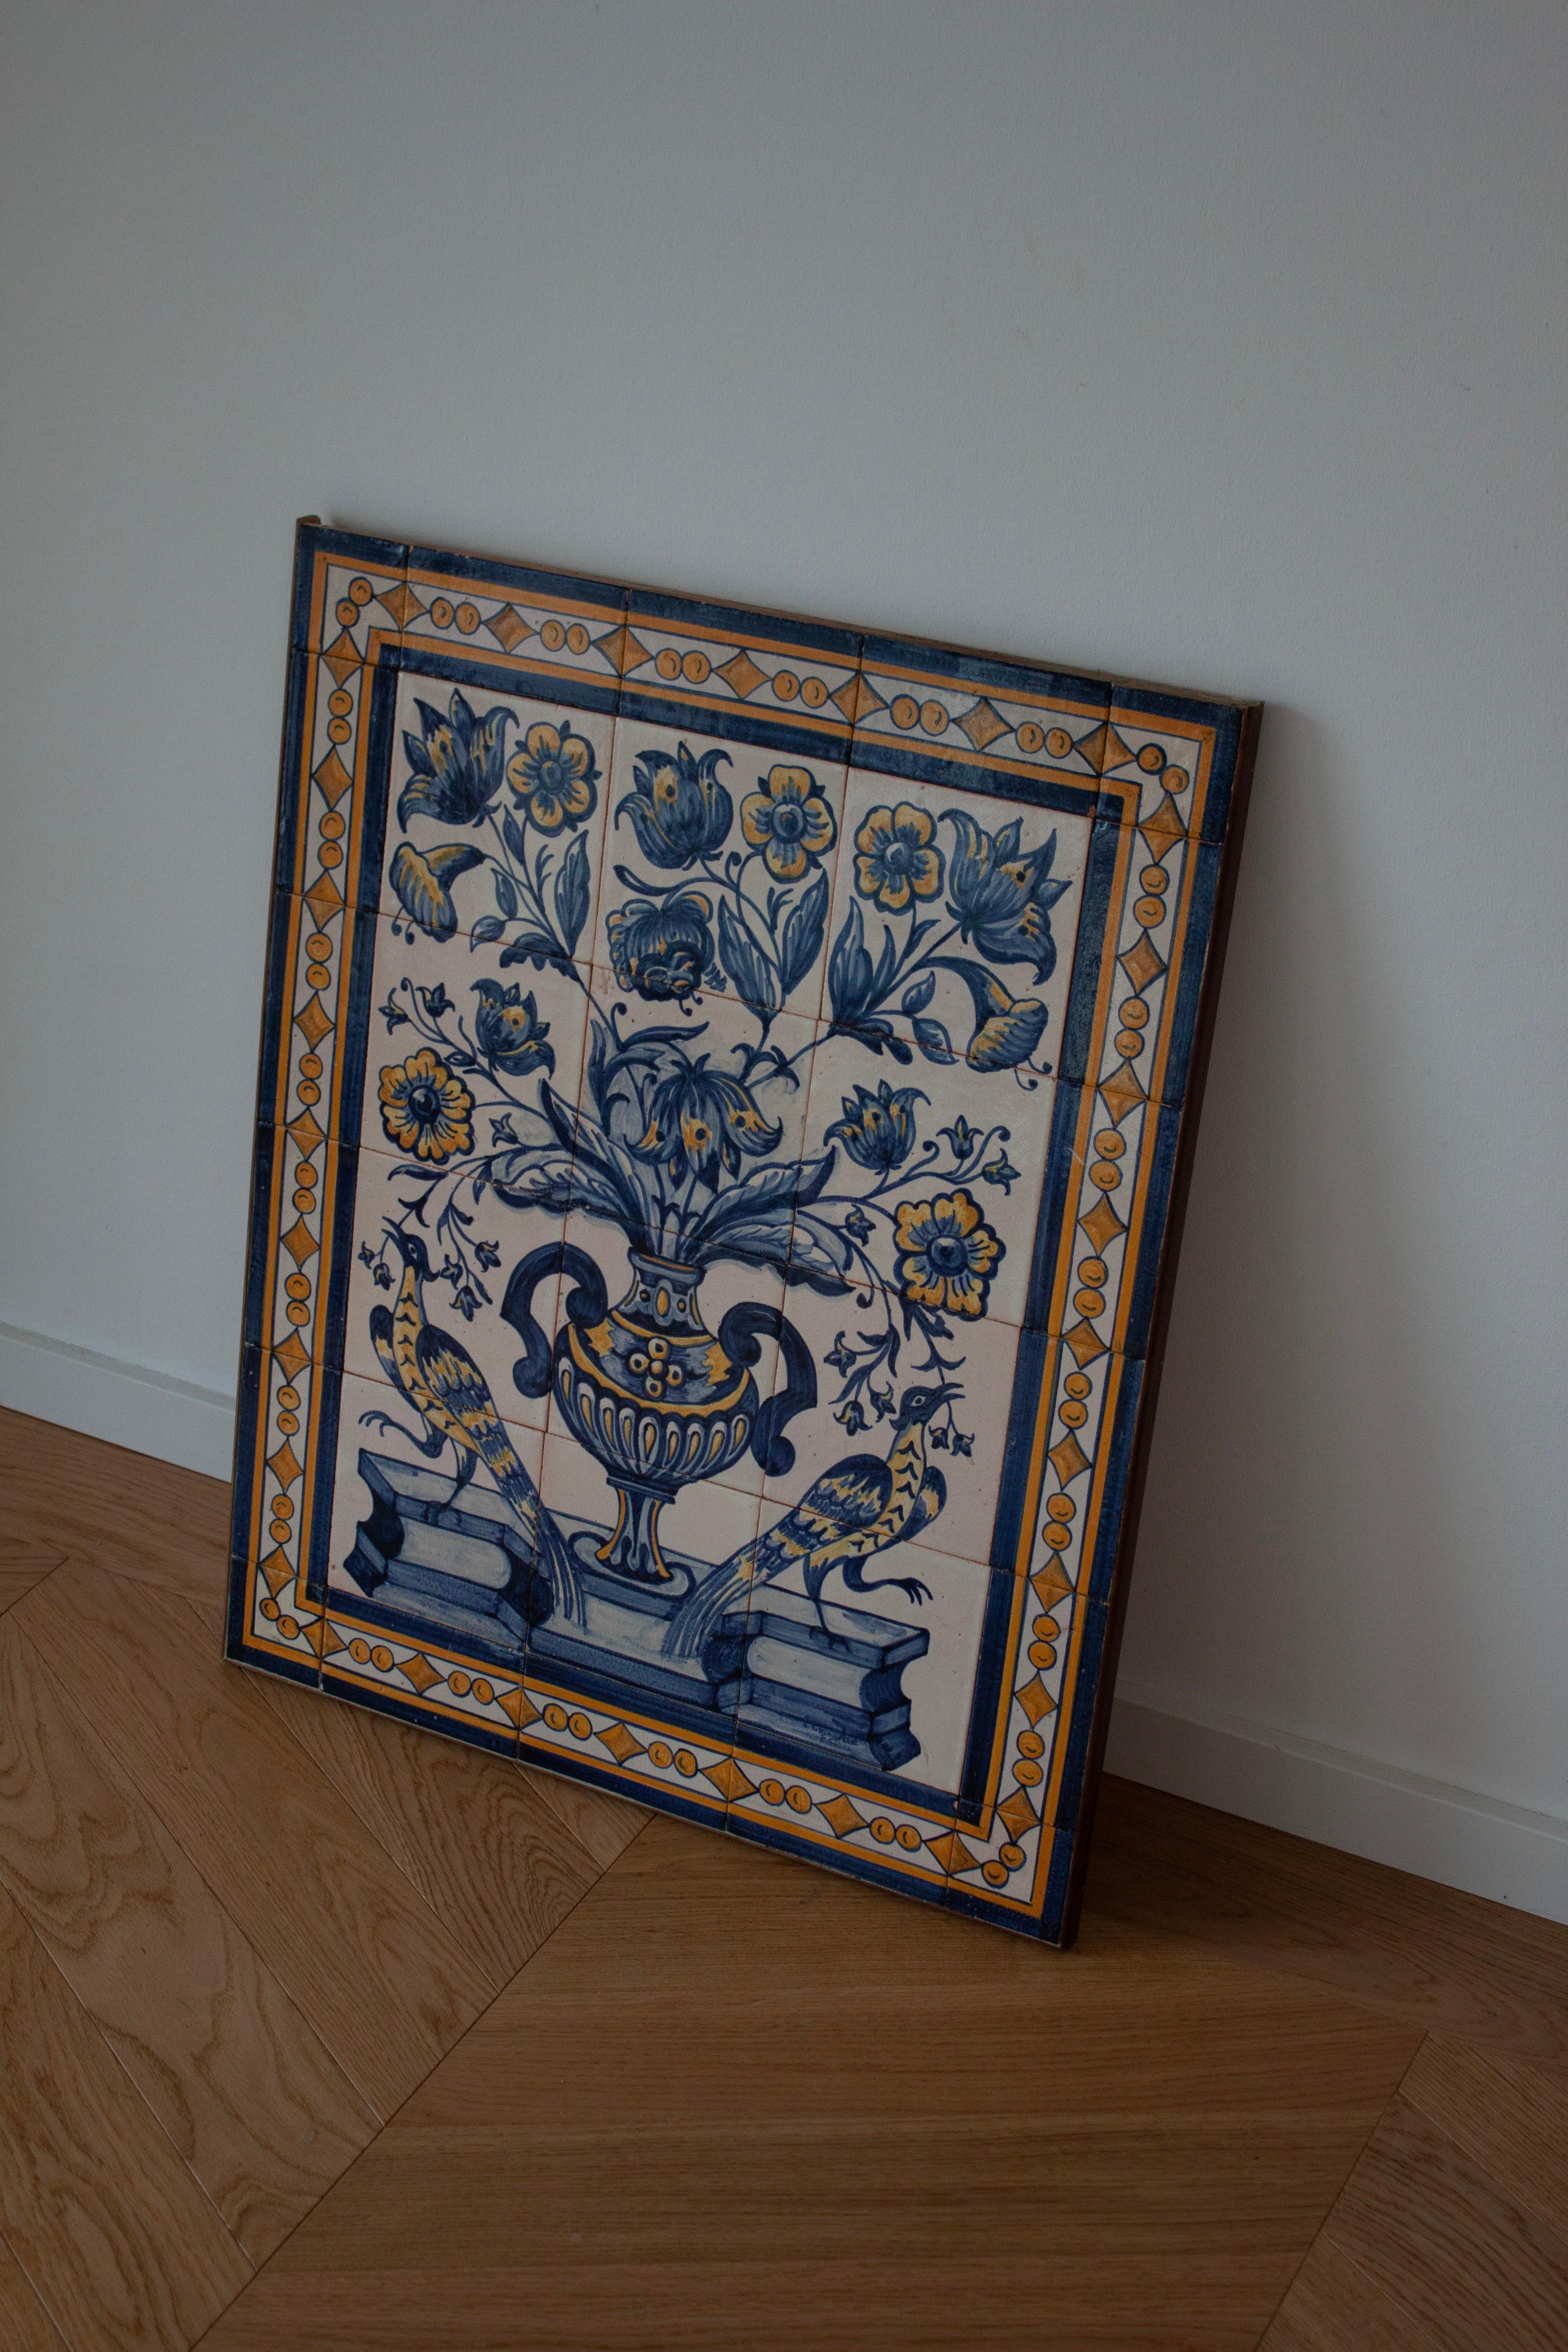 Glazed European Floral and Animal Blue and White Tiled Wall Artwork Wall Hanging  For Sale